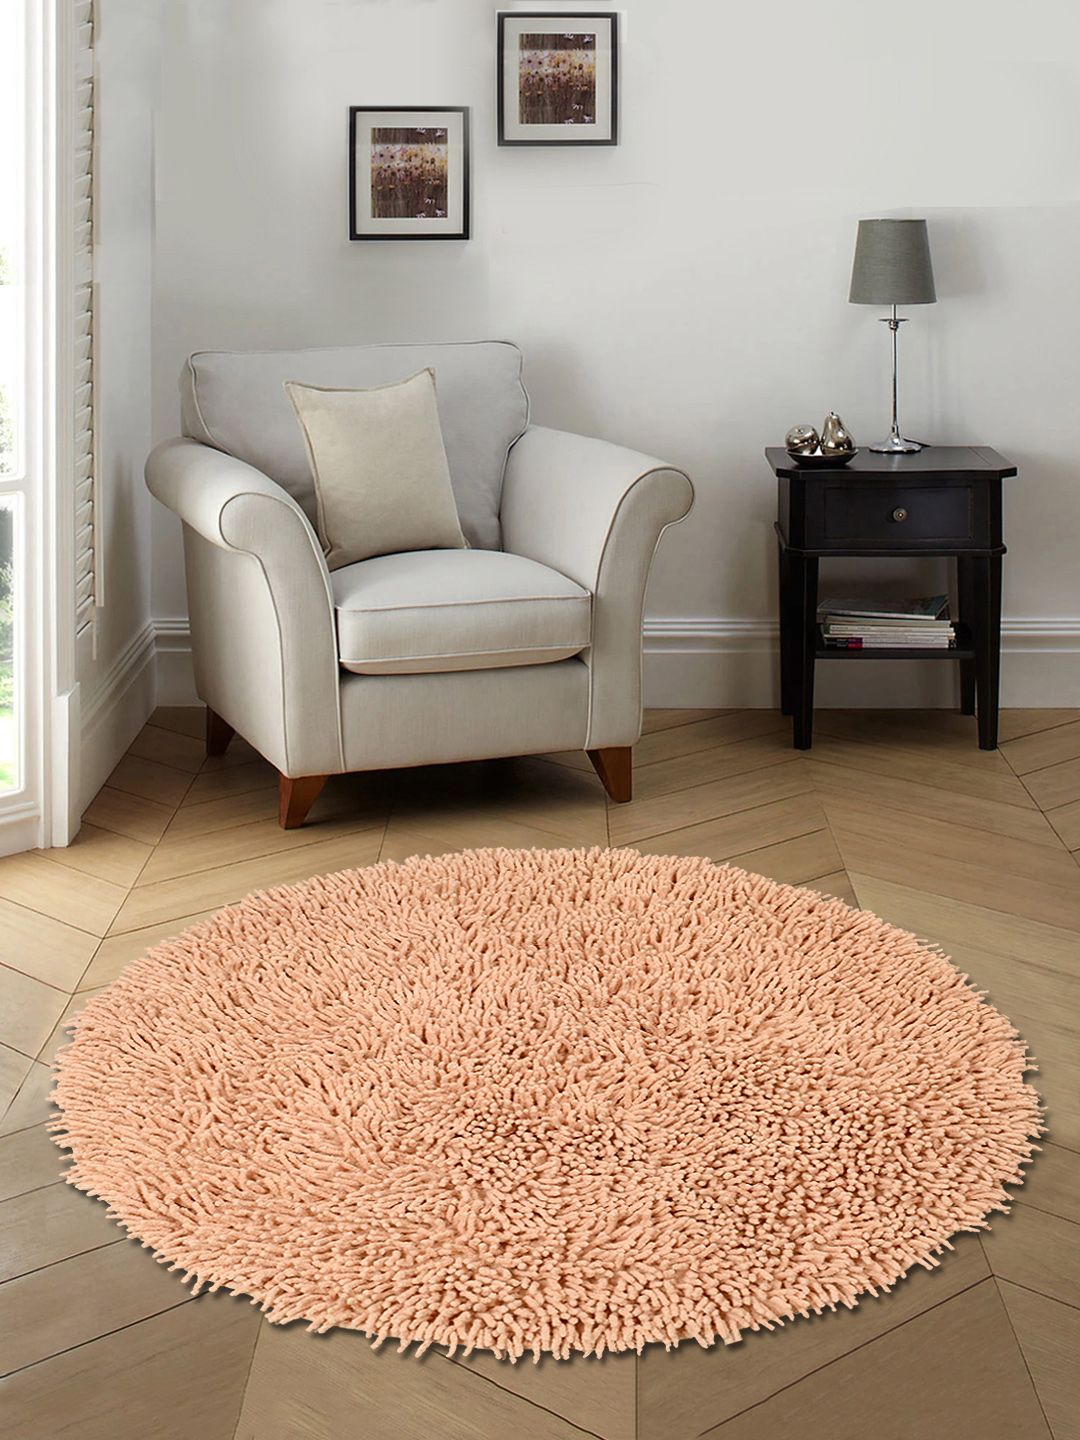 Saral Home Beige Solid Cotton Anti-Skid Shaggy Round Bath Mat Price in India